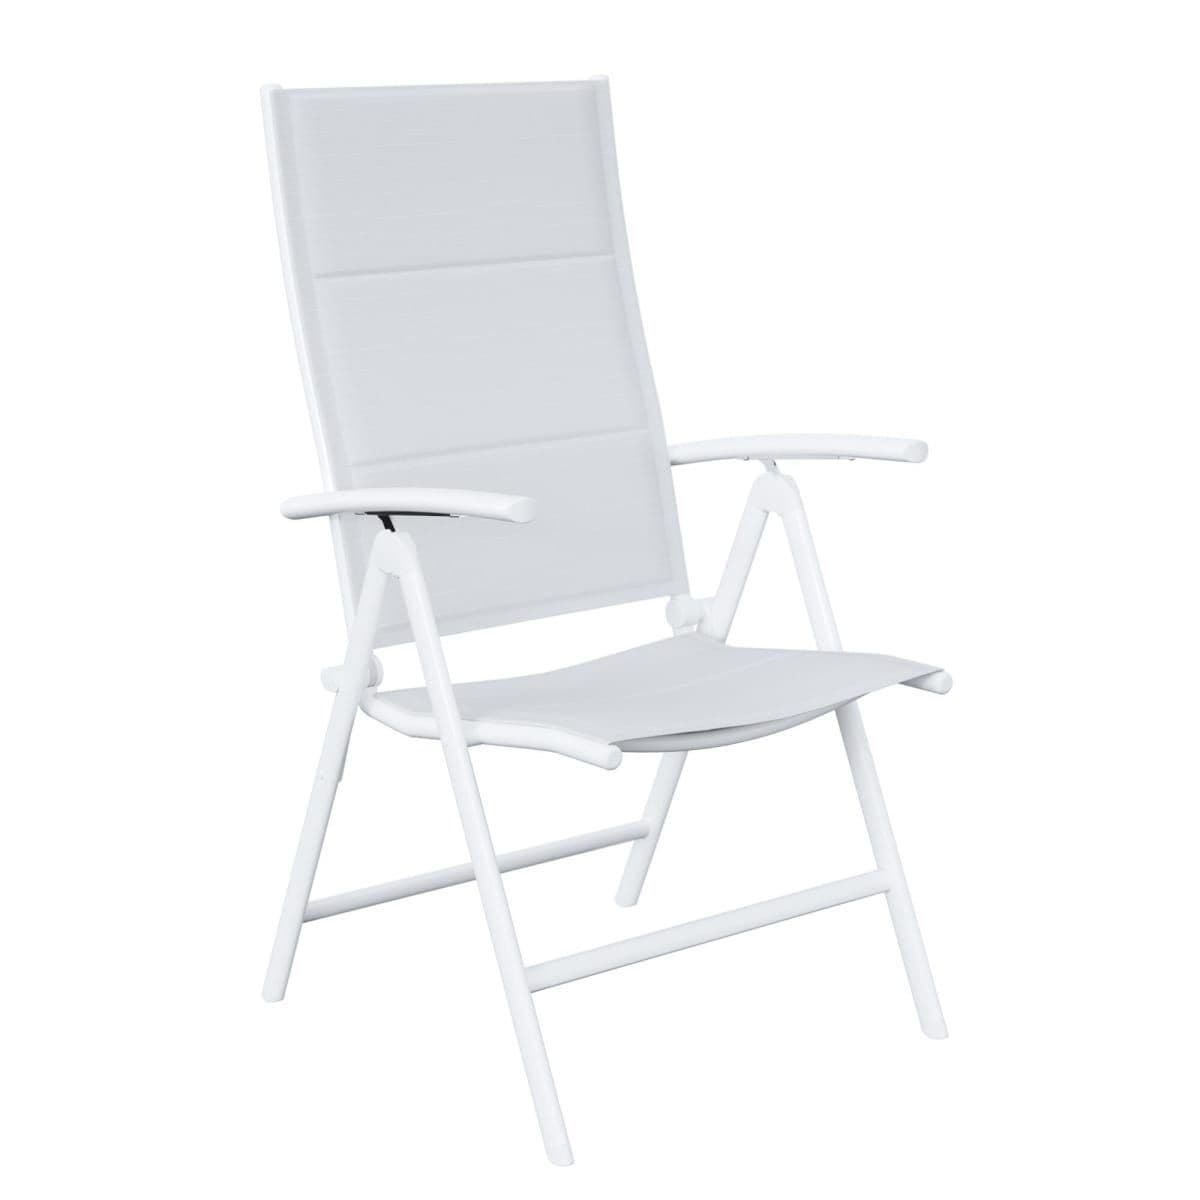 ARMCHAIR ORION II NATERIAL Aluminum, textilene, white multiposition - Premium Sun Loungers and Armchairs from Bricocenter - Just €68.99! Shop now at Maltashopper.com